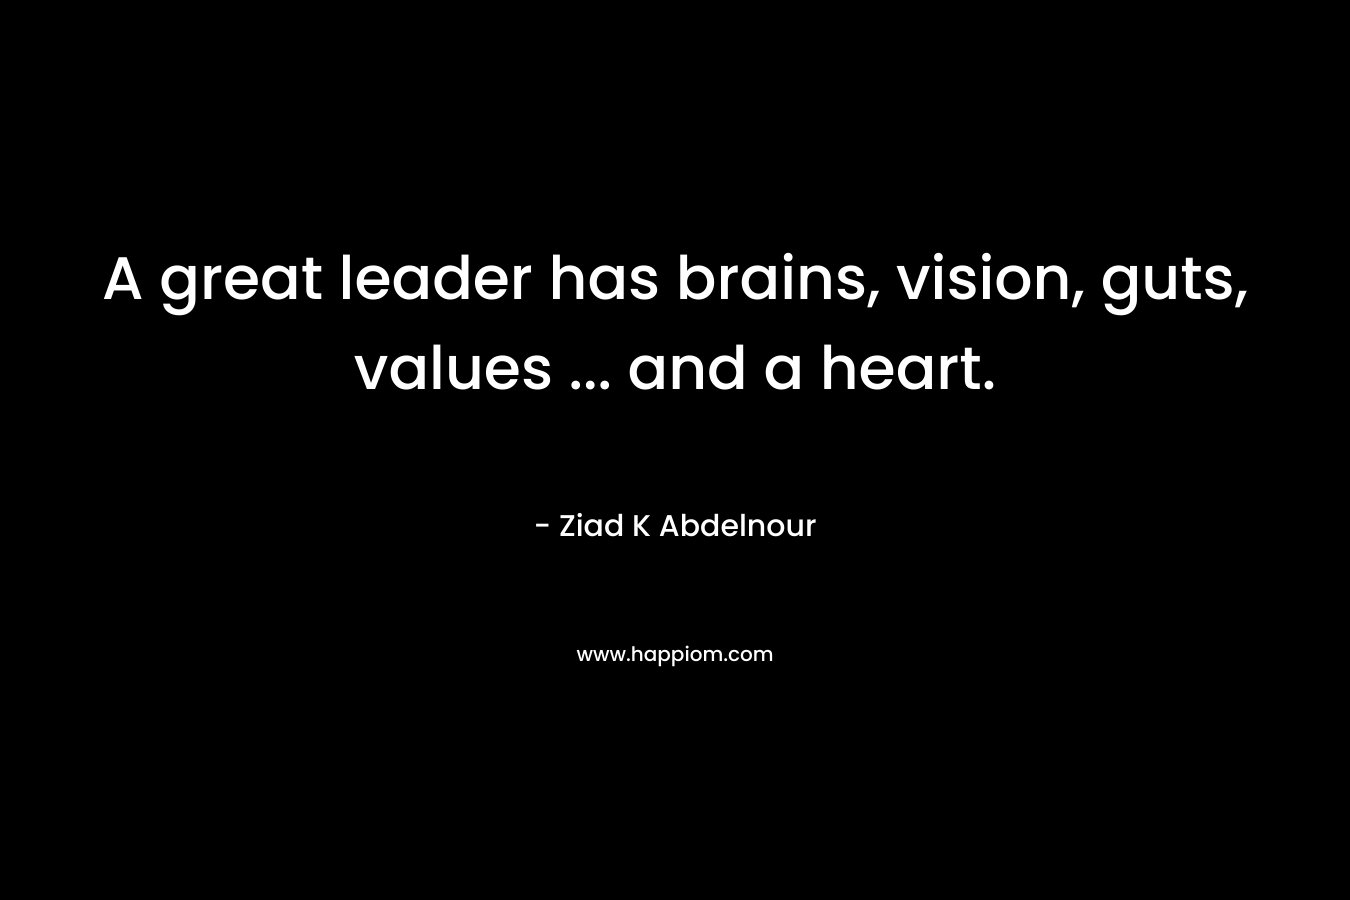 A great leader has brains, vision, guts, values … and a heart. – Ziad K Abdelnour